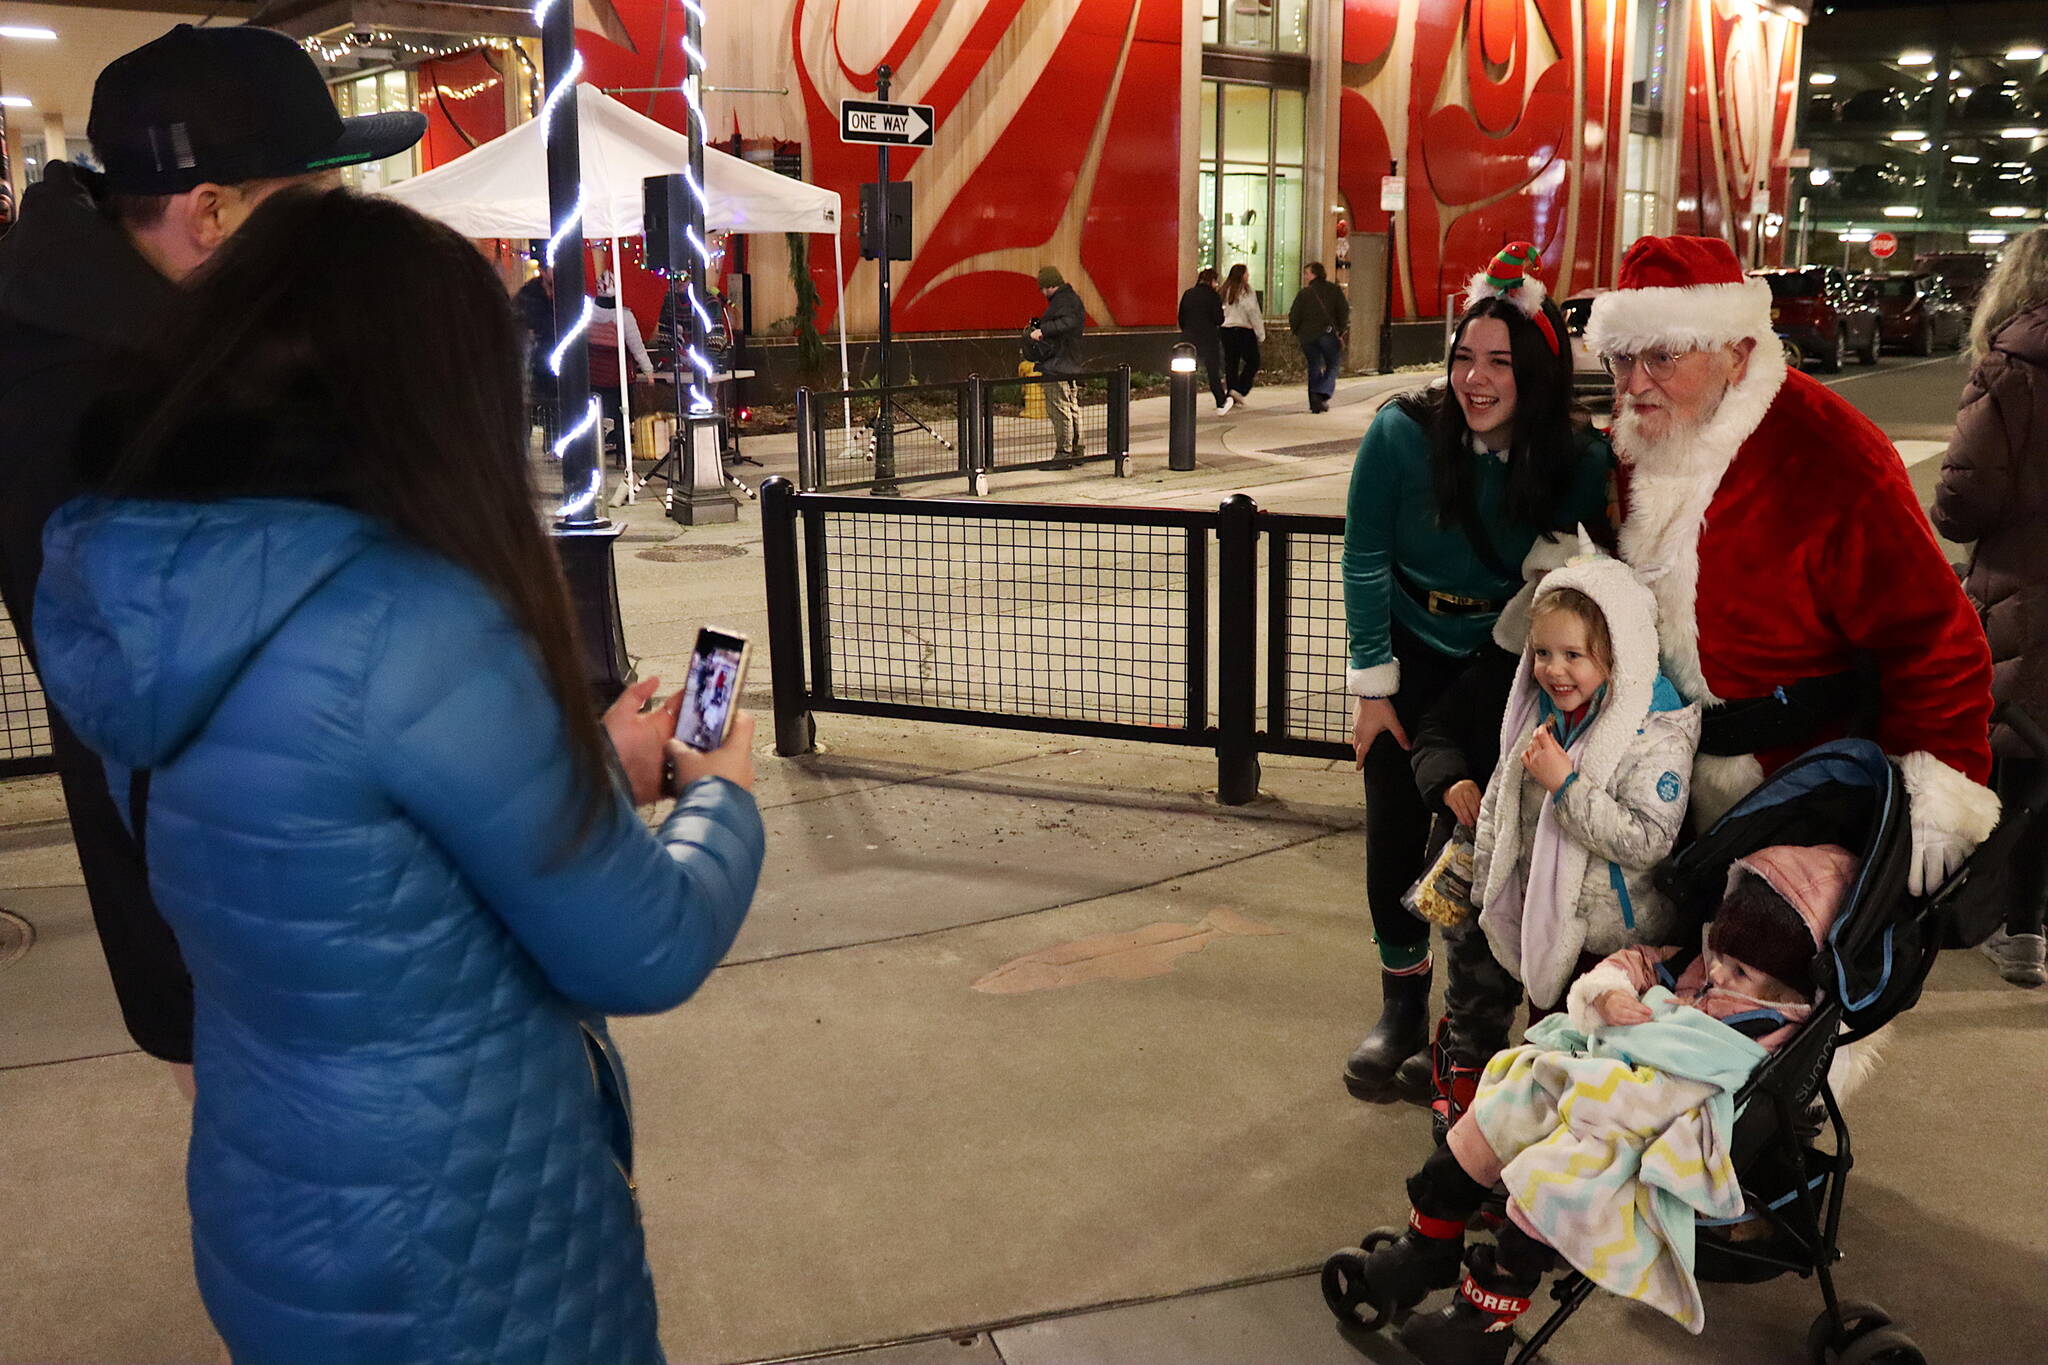 Marzena Whitmore (elf) and Dale Hudson (Santa), pose for a photo with Benny Orvin (partially obscured), 6, and his siblings Lilly, 4, and Remi, 2, taken by their mother Alex as their father Randy watches during Gallery Walk in downtown Juneau on Friday. (Mark Sabbatini / Juneau Empire)